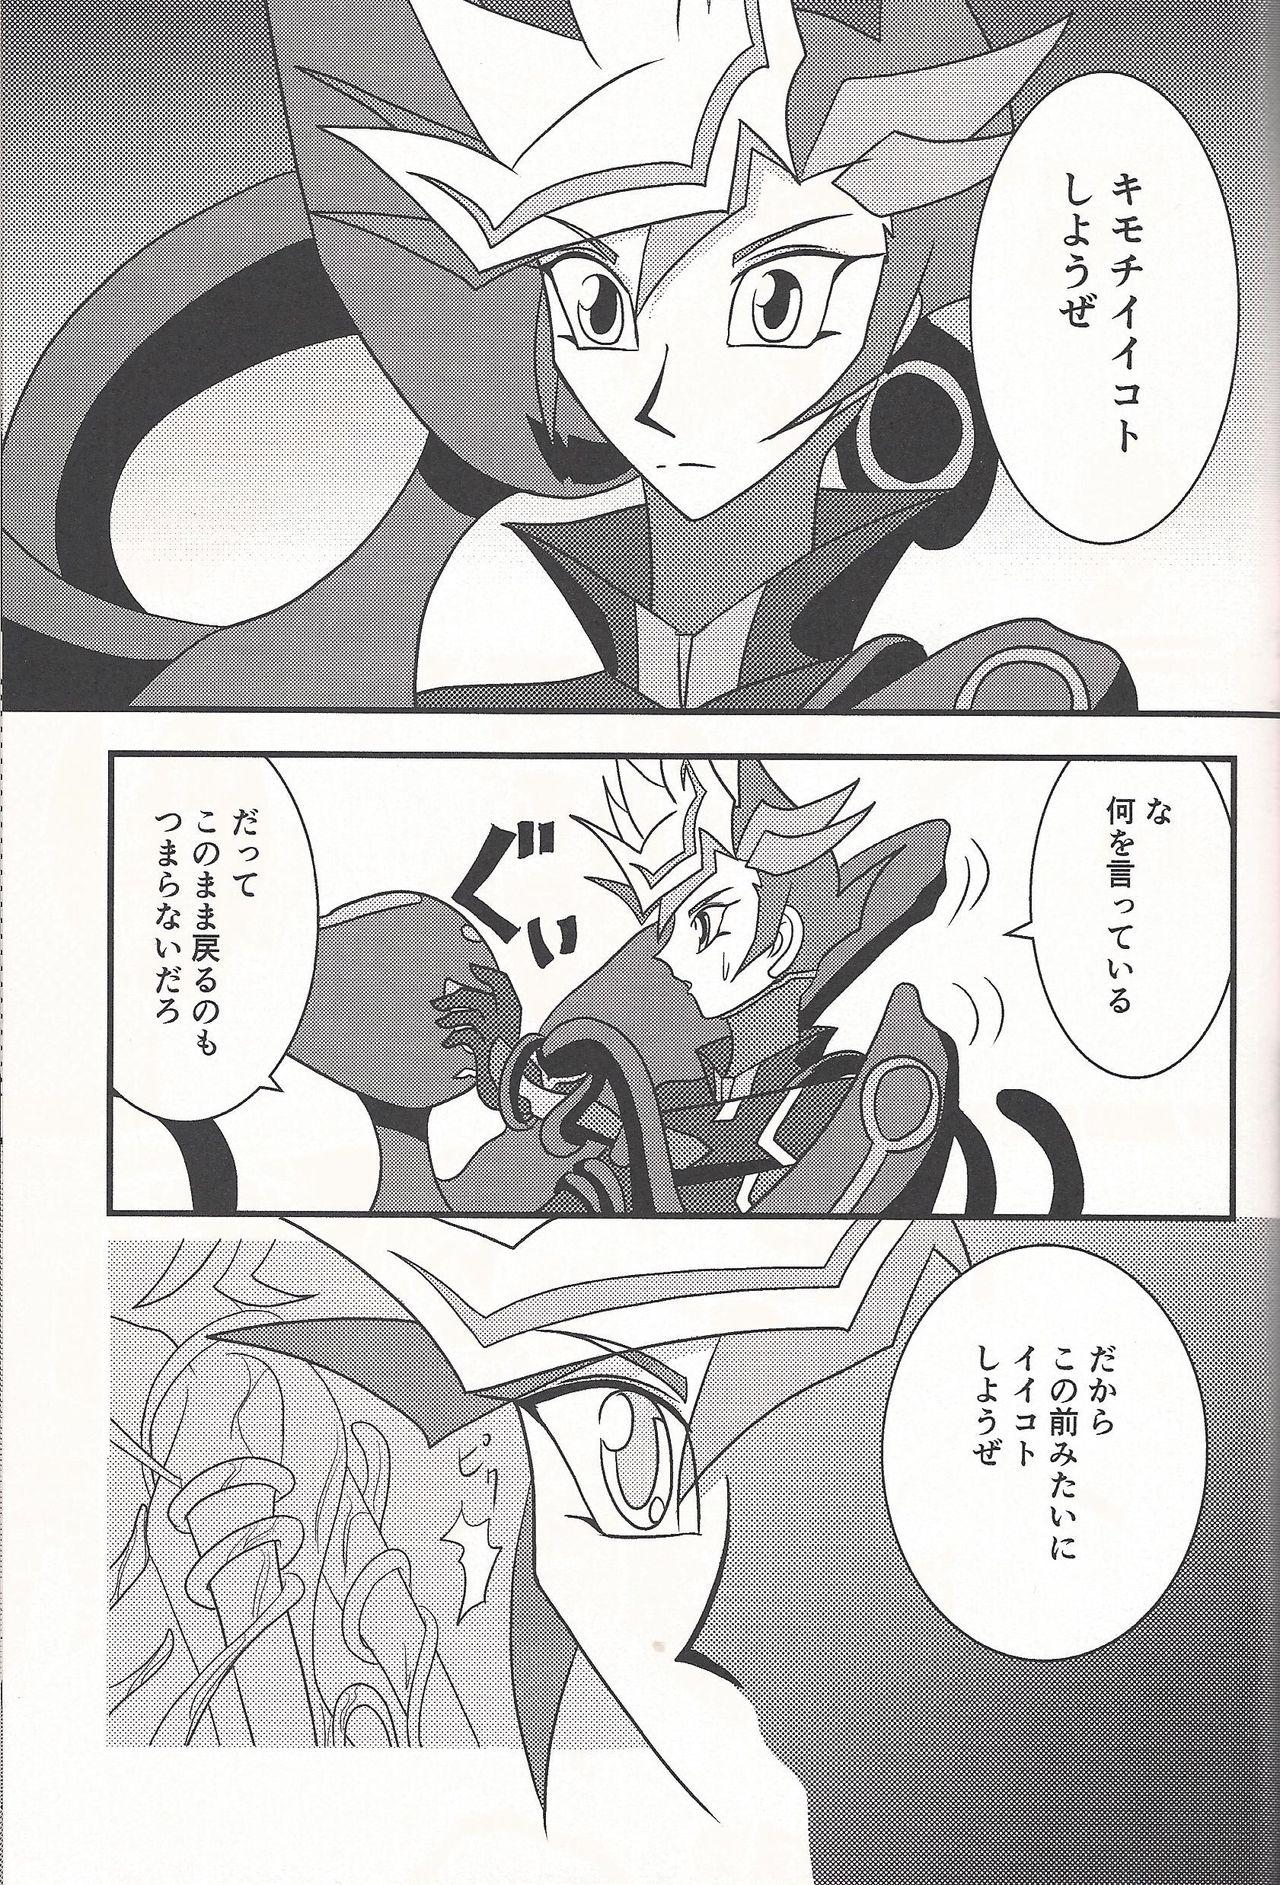 Adorable Mirrors gate - Yu gi oh vrains Machine - Page 6